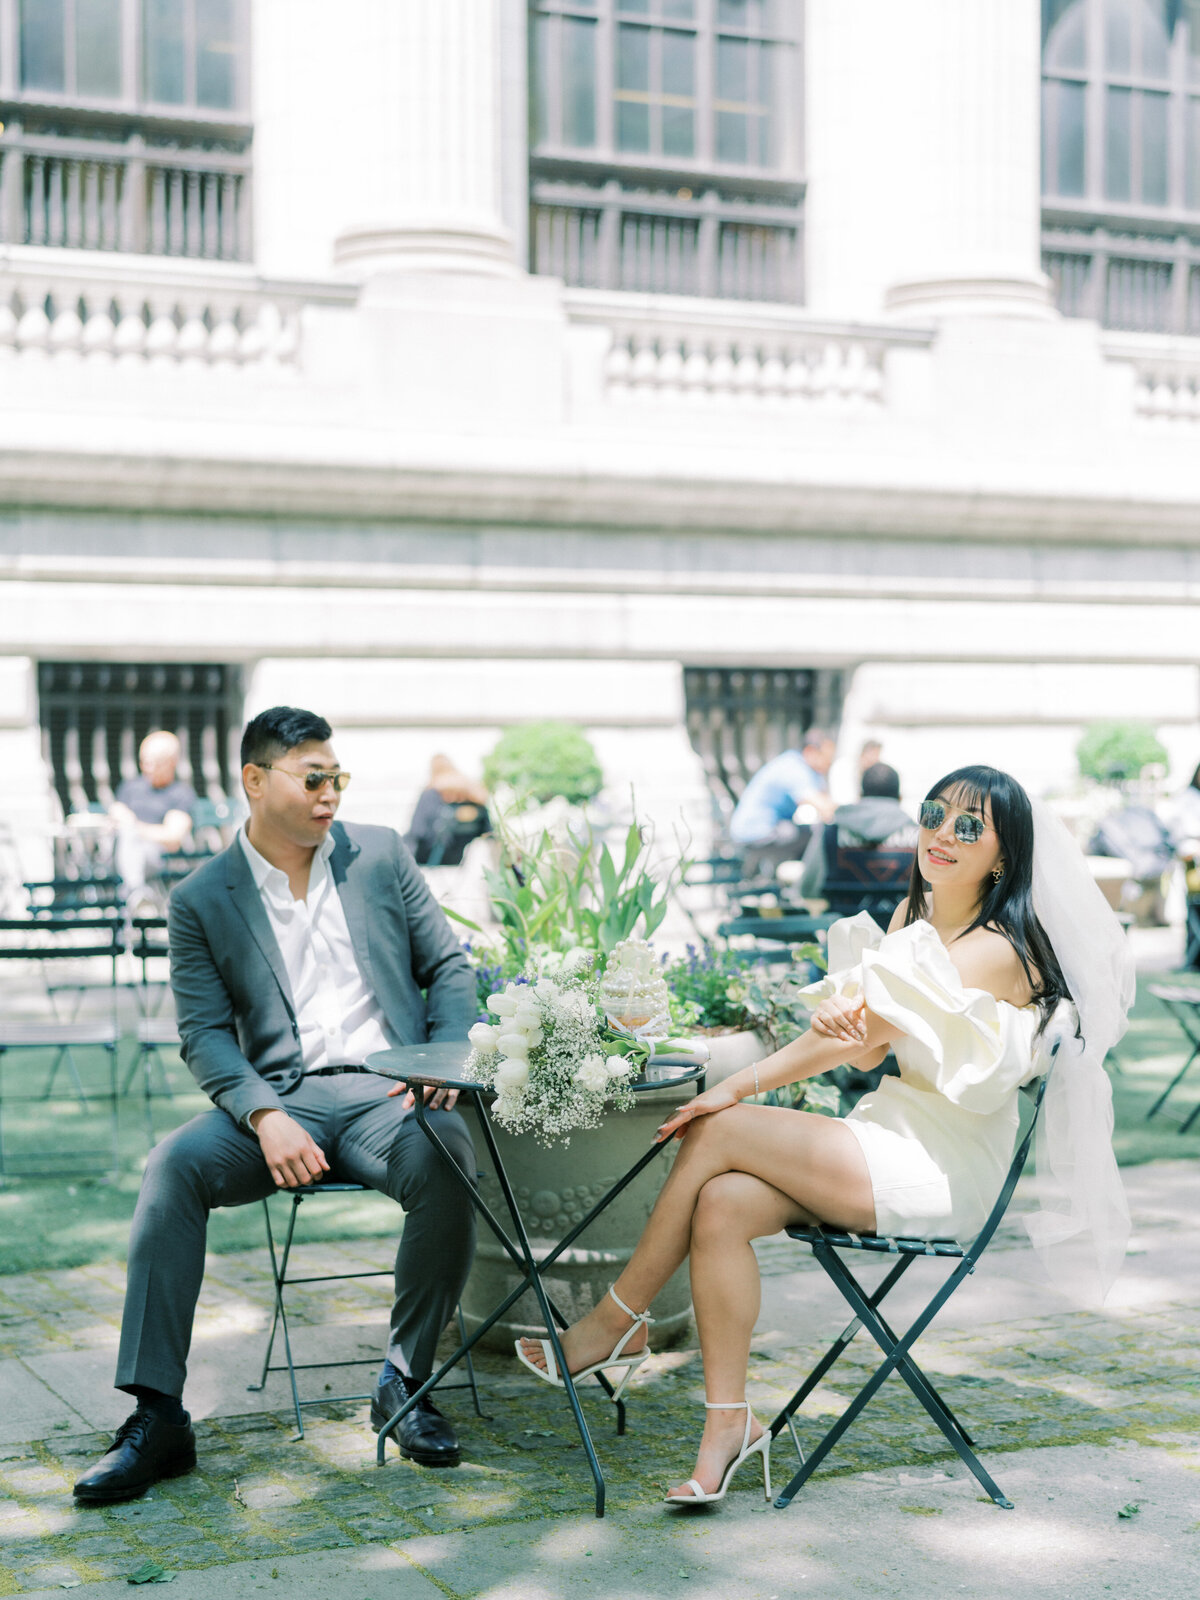 Vogue Editiorial NYC Elopement Themed Engagement Session Highlights | Amarachi Ikeji Photography 31